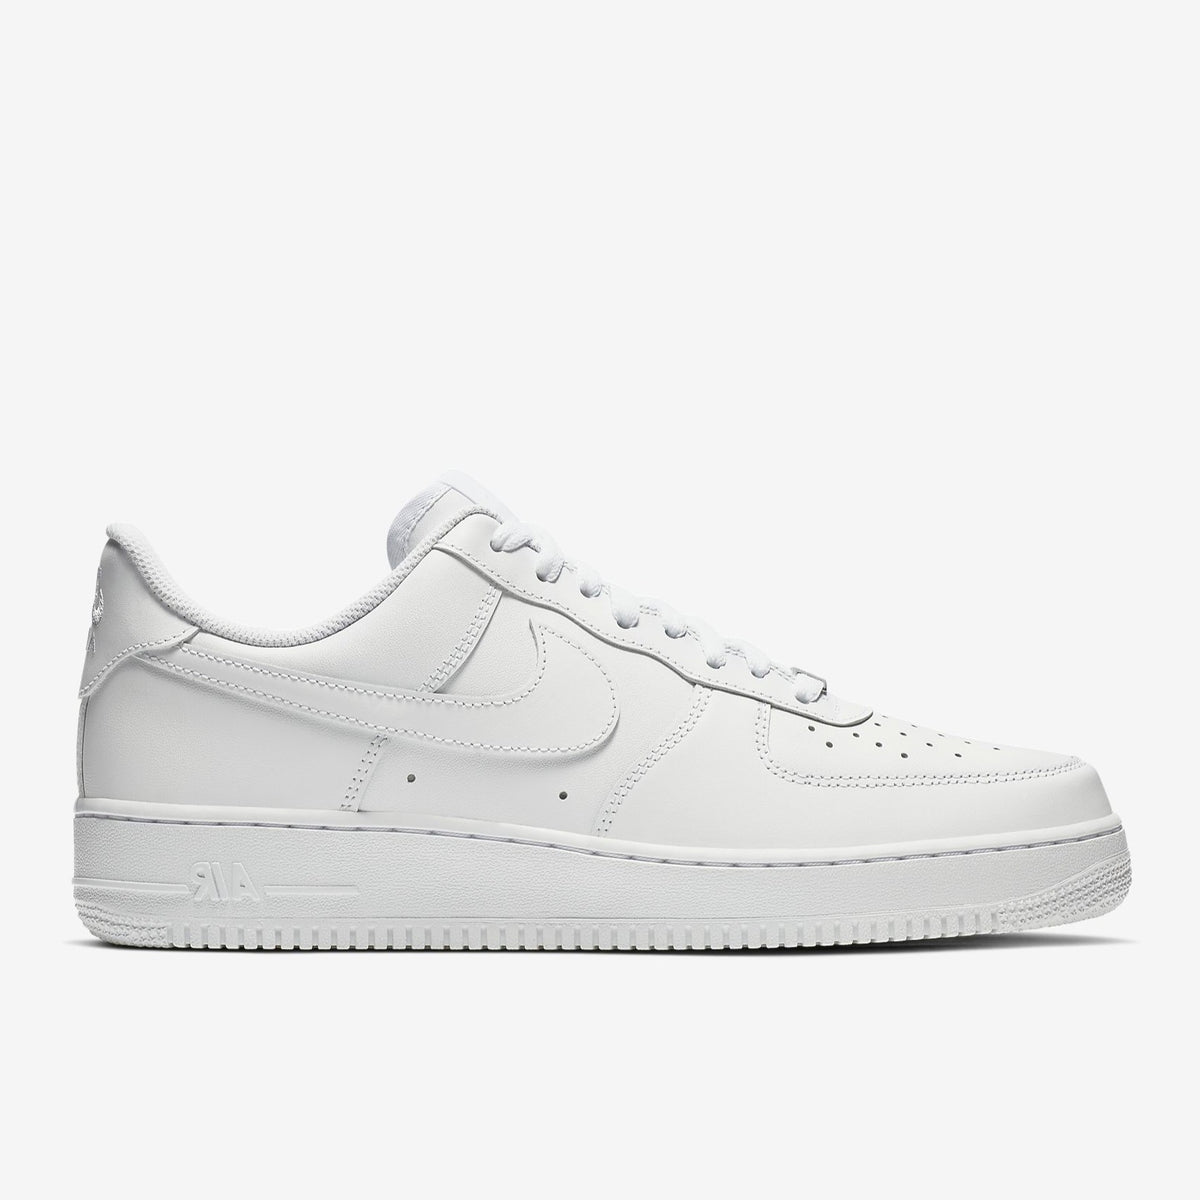 Nike Air Force 1 '07 White – Pier Store Costa Rica